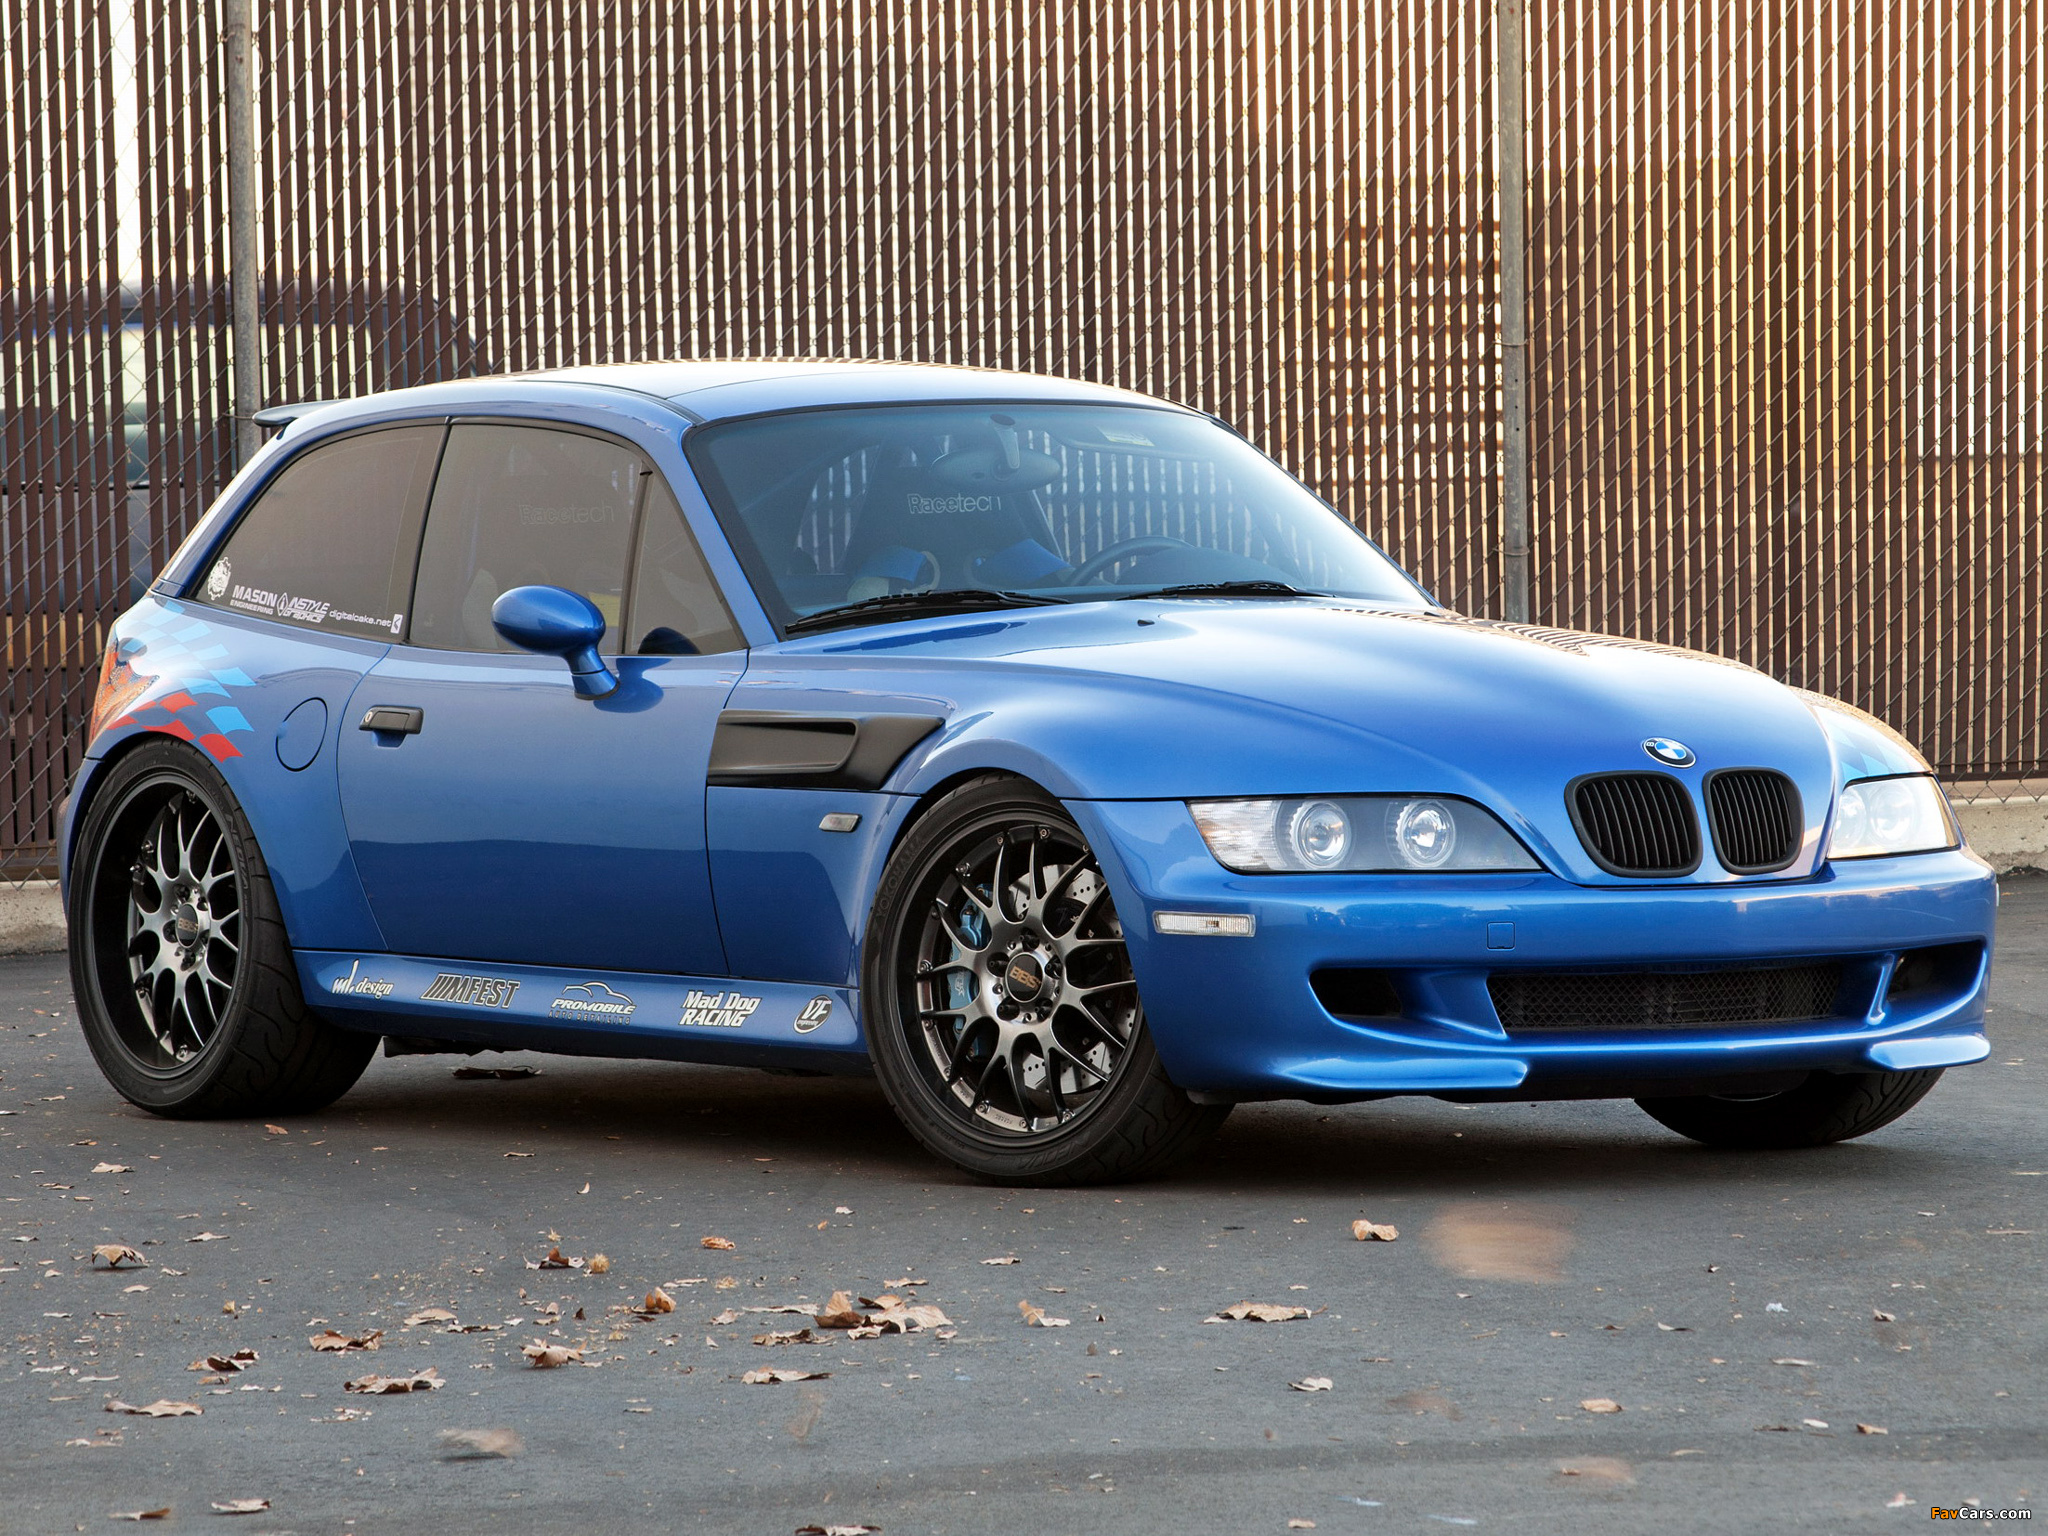 Z3 ru. BMW z3 Coupe. BMW z3 m Coupe. BMW z3 m Coupe 2001. BMW z3 m Coupe Tuning.